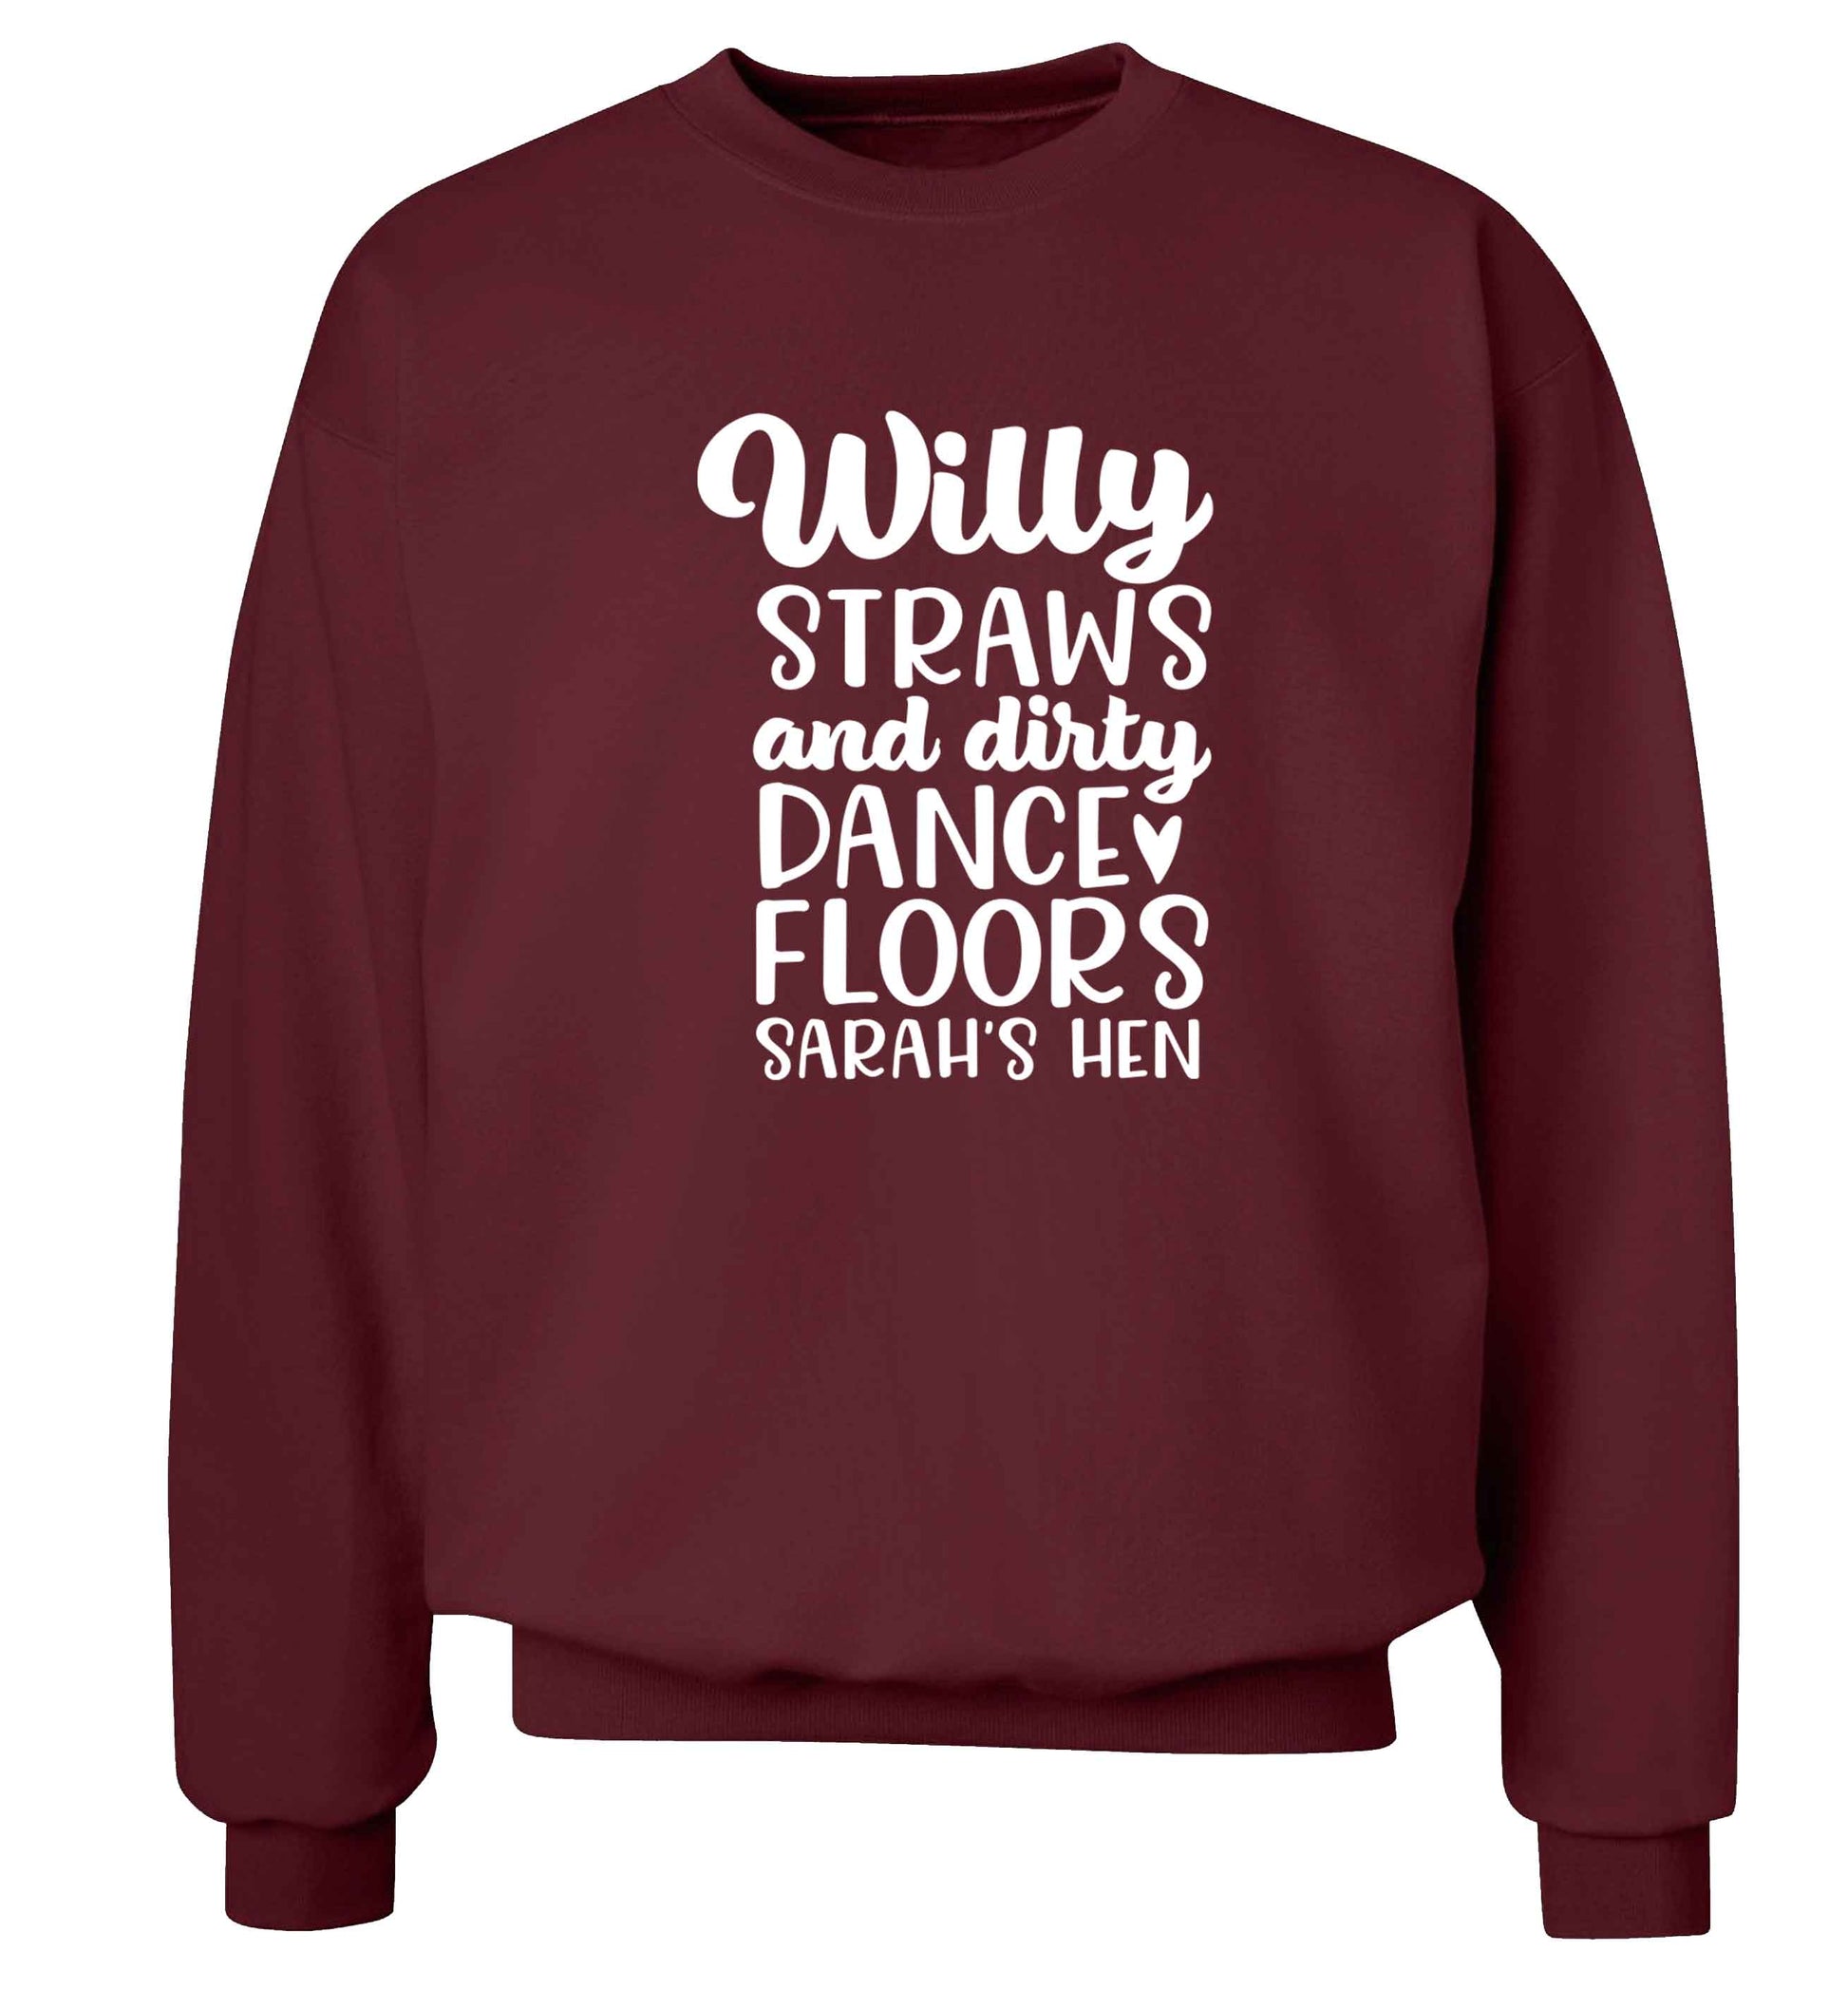 Willy straws and dirty dance floors adult's unisex maroon sweater 2XL